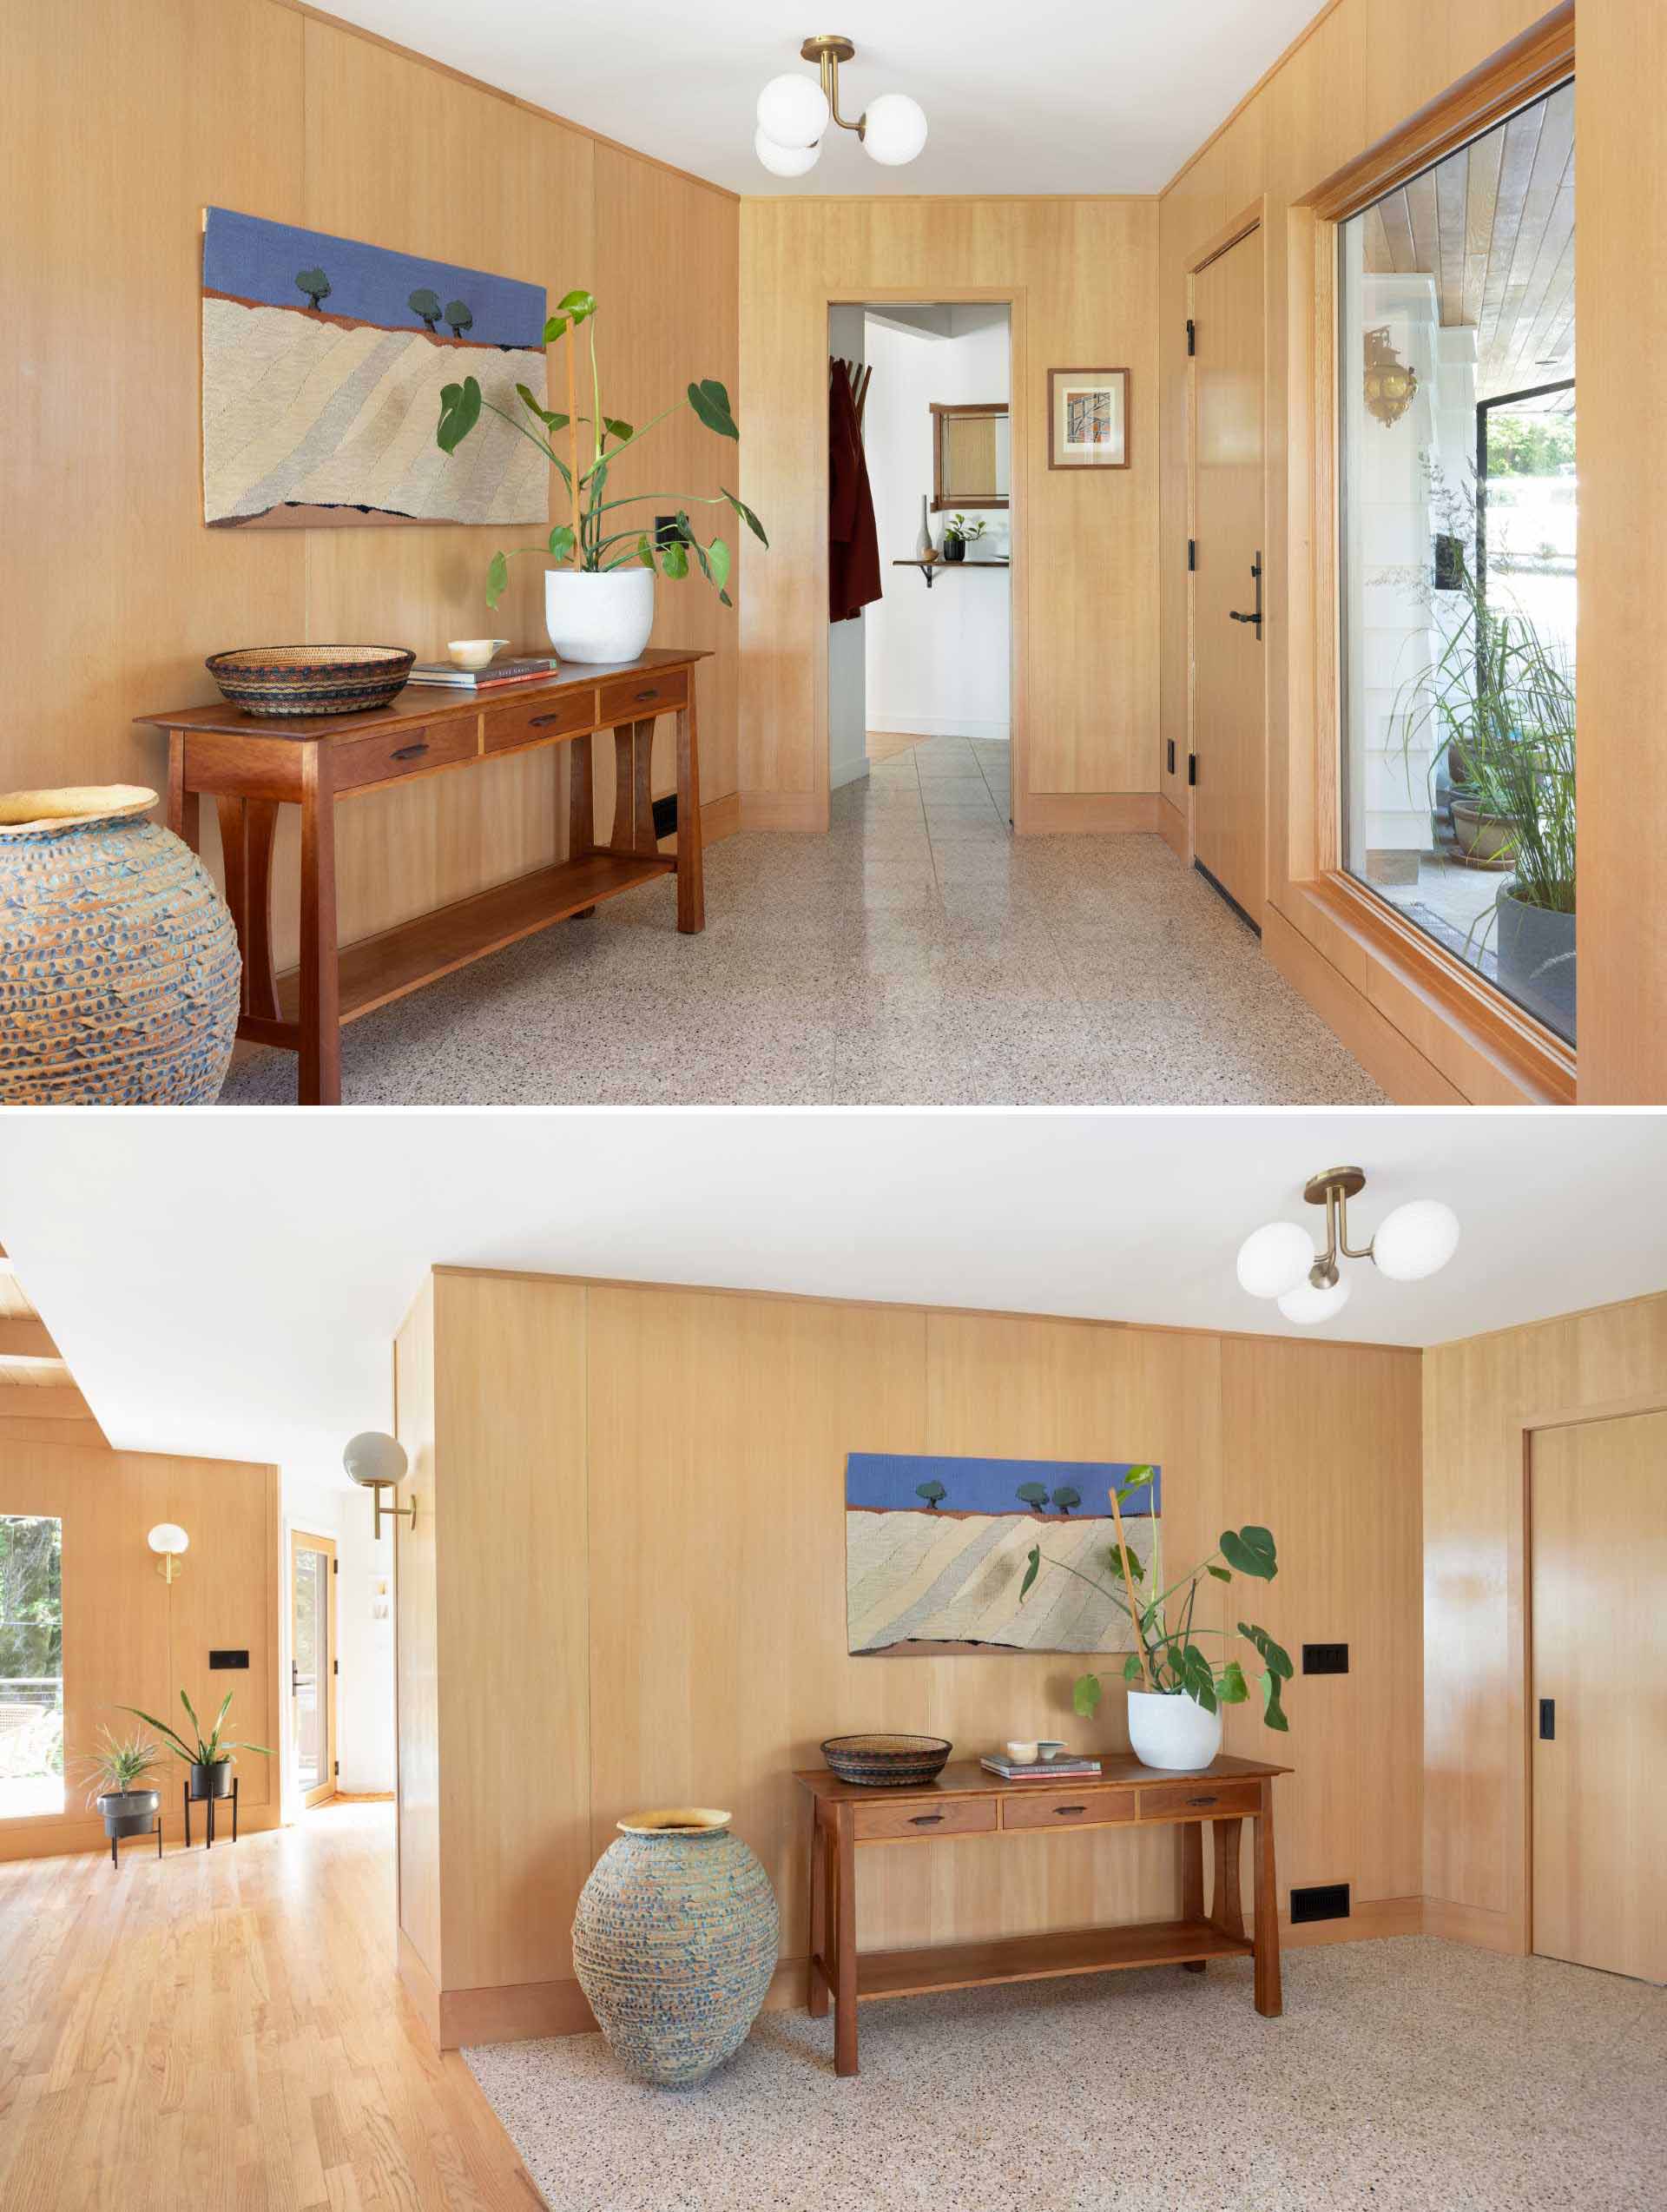 This updated entryway is lined with wood and includes a large window and tiled flooring.